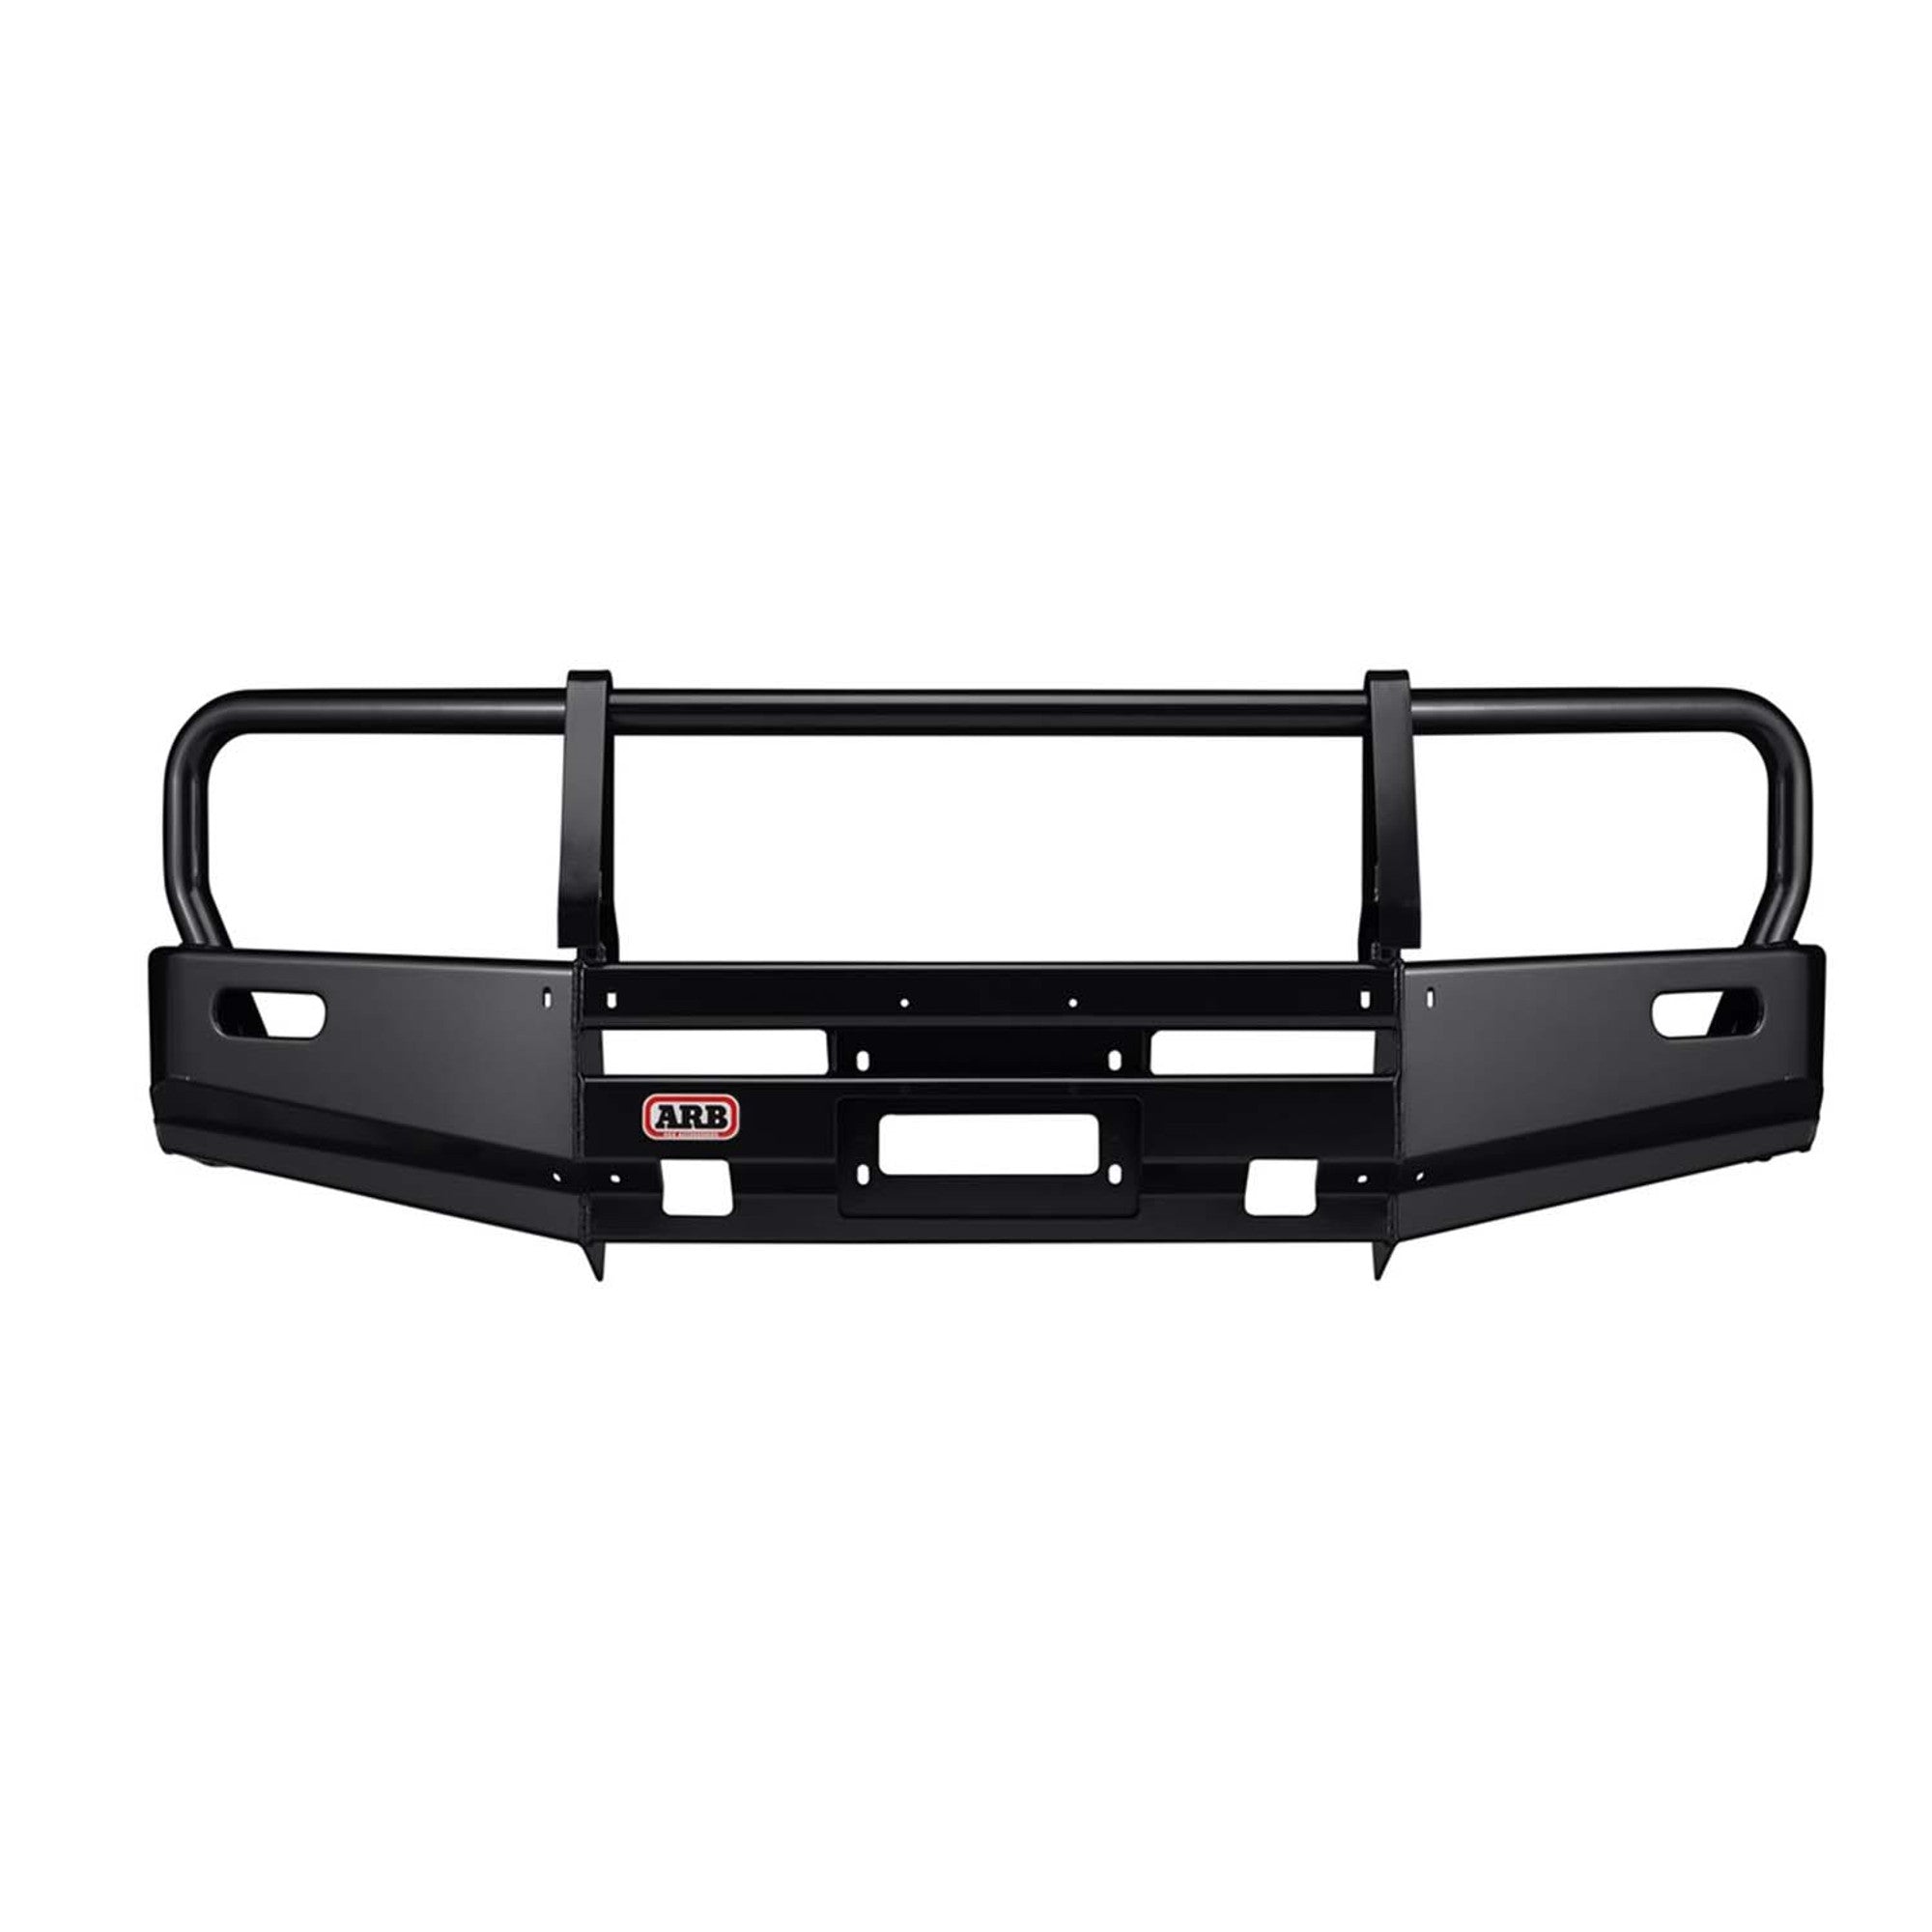 ARB 3423030 Toyota Tacoma 2005-2011 Deluxe Front Bumper Winch Ready with Grille Guard, Black Powder Coat Finish - BumperStock